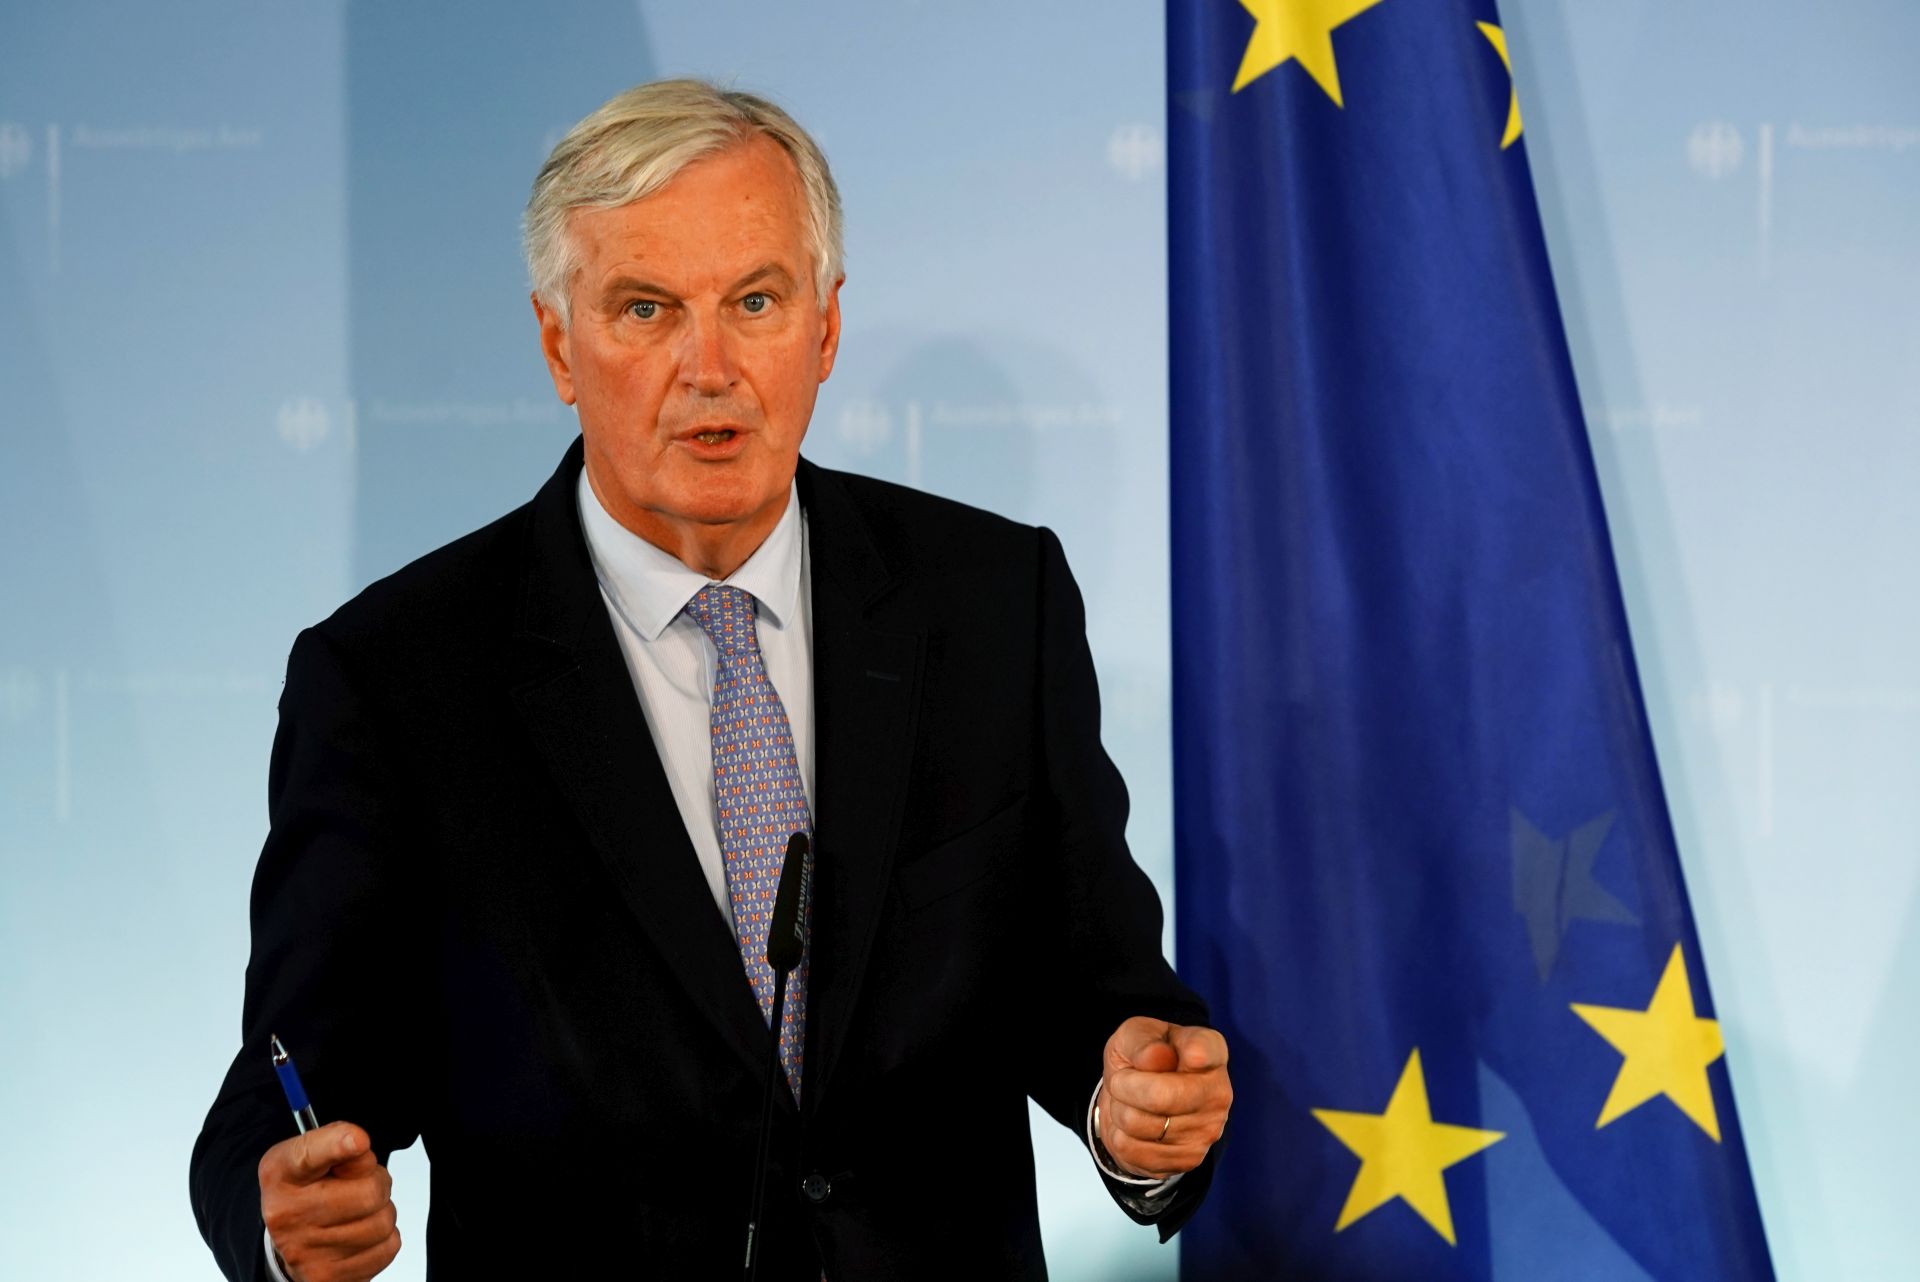 epa07863937 European Union's chief Brexit negotiator Michel Barnier speaks during a press conference after a meeting with German Foreign Minister Heiko Maas (not seen) in Berlin, Germany, 23 September 2019.  EPA/ALEXANDER BECHER